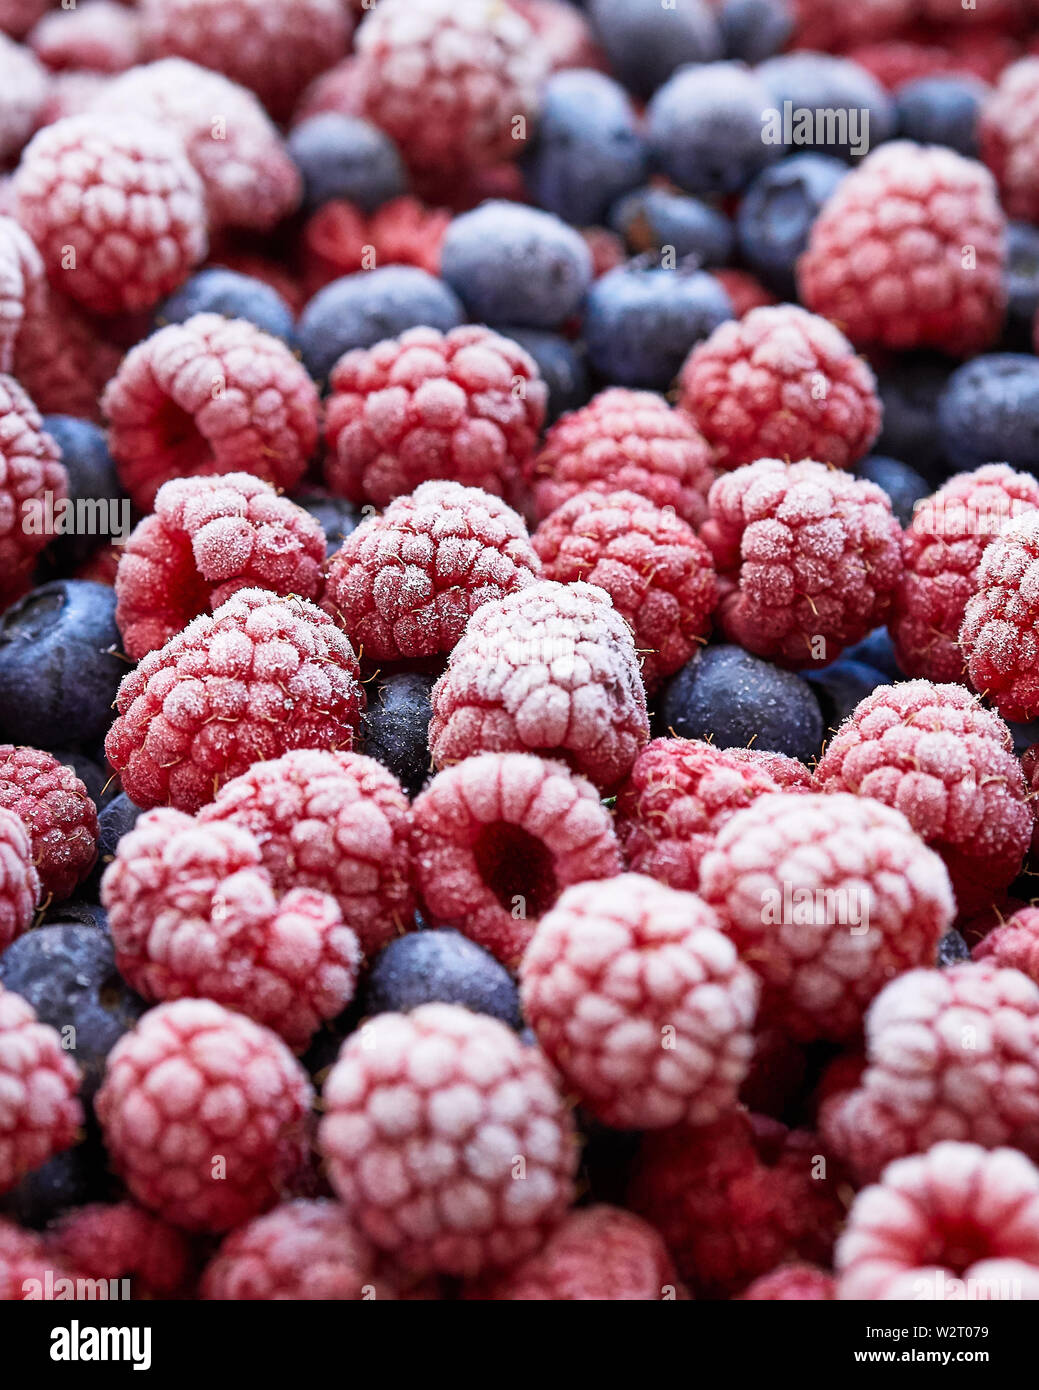 Background of frozen berries. Top view of raspberries and blueberries. Stock Photo